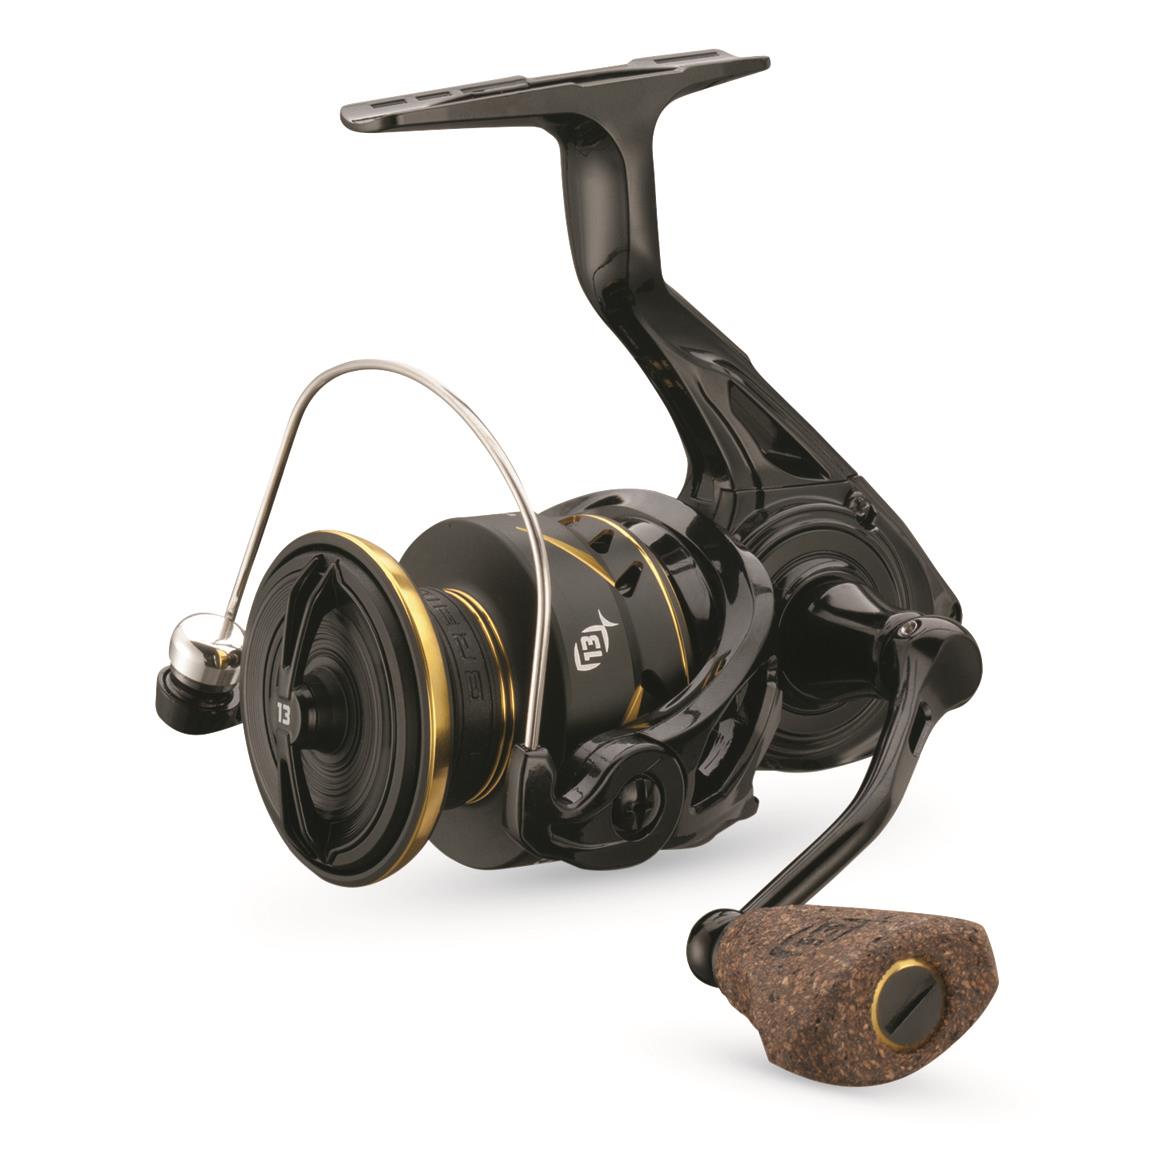 Daiwa Crossfire LT 1000 Spinning Reel, 5.2:1 Gear Ratio - 722775, Spinning  Reels at Sportsman's Guide